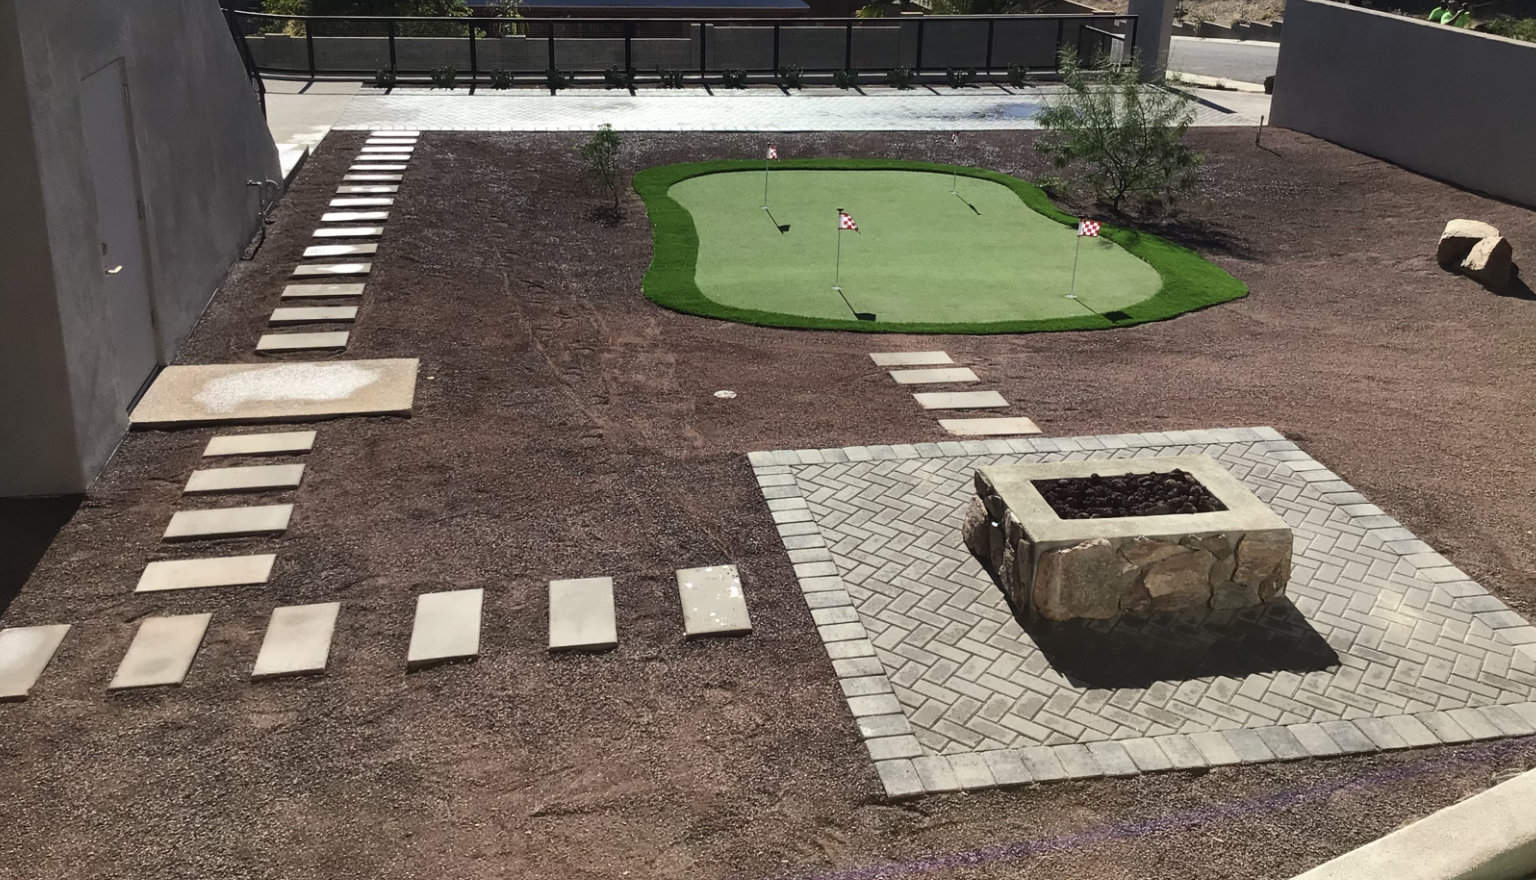 mini-golf course surrounded by rocks, pavers and a custom stone fireplace